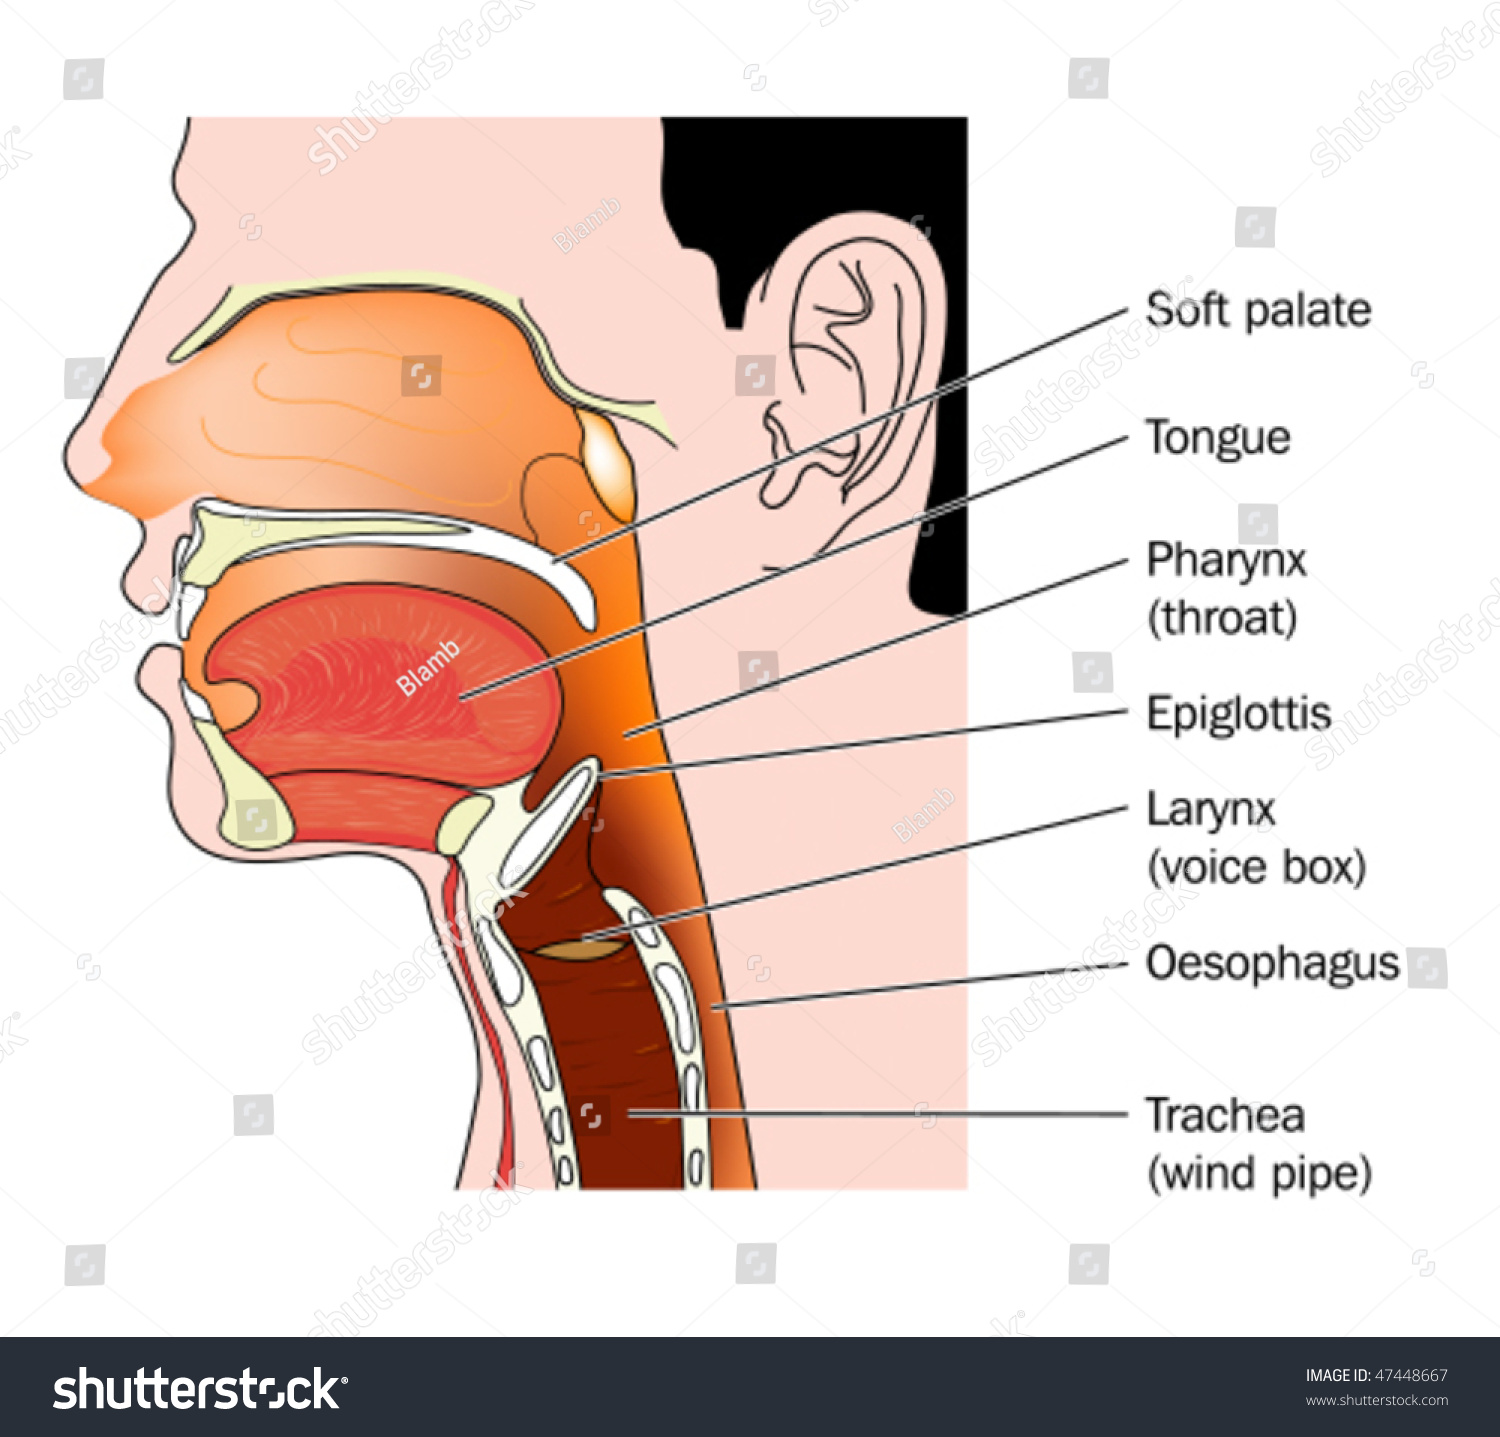 Nose Mouth Throat Cross Section Labeled Stock Vector